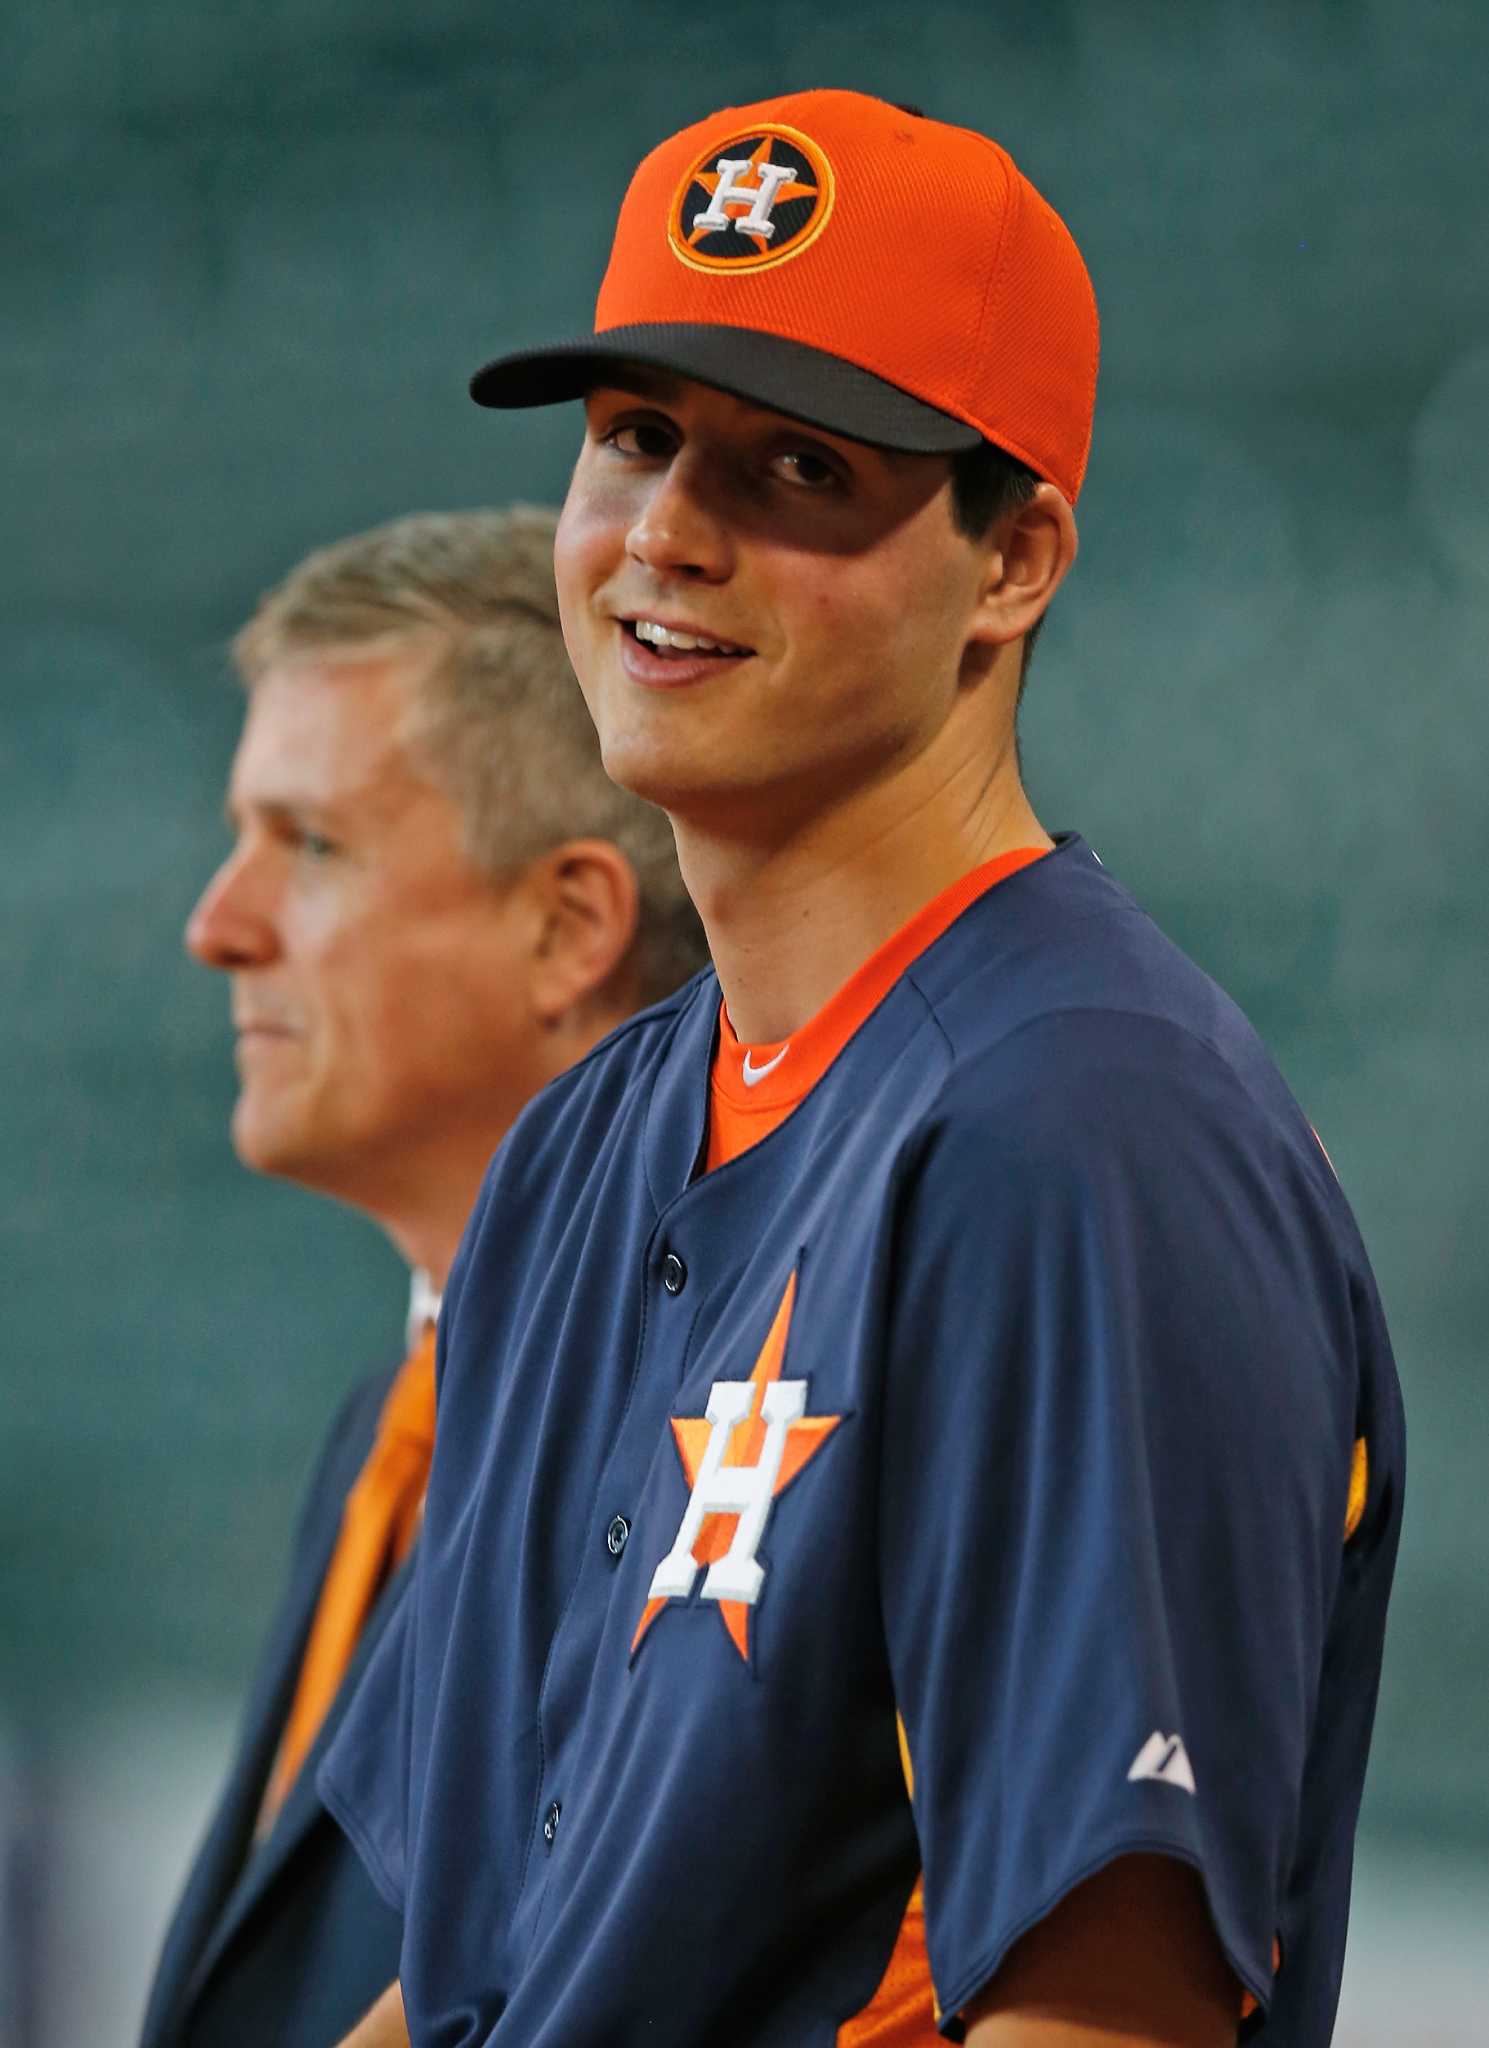 Mark Appel, No. 1 overall MLB pick in 2013, stepping away from